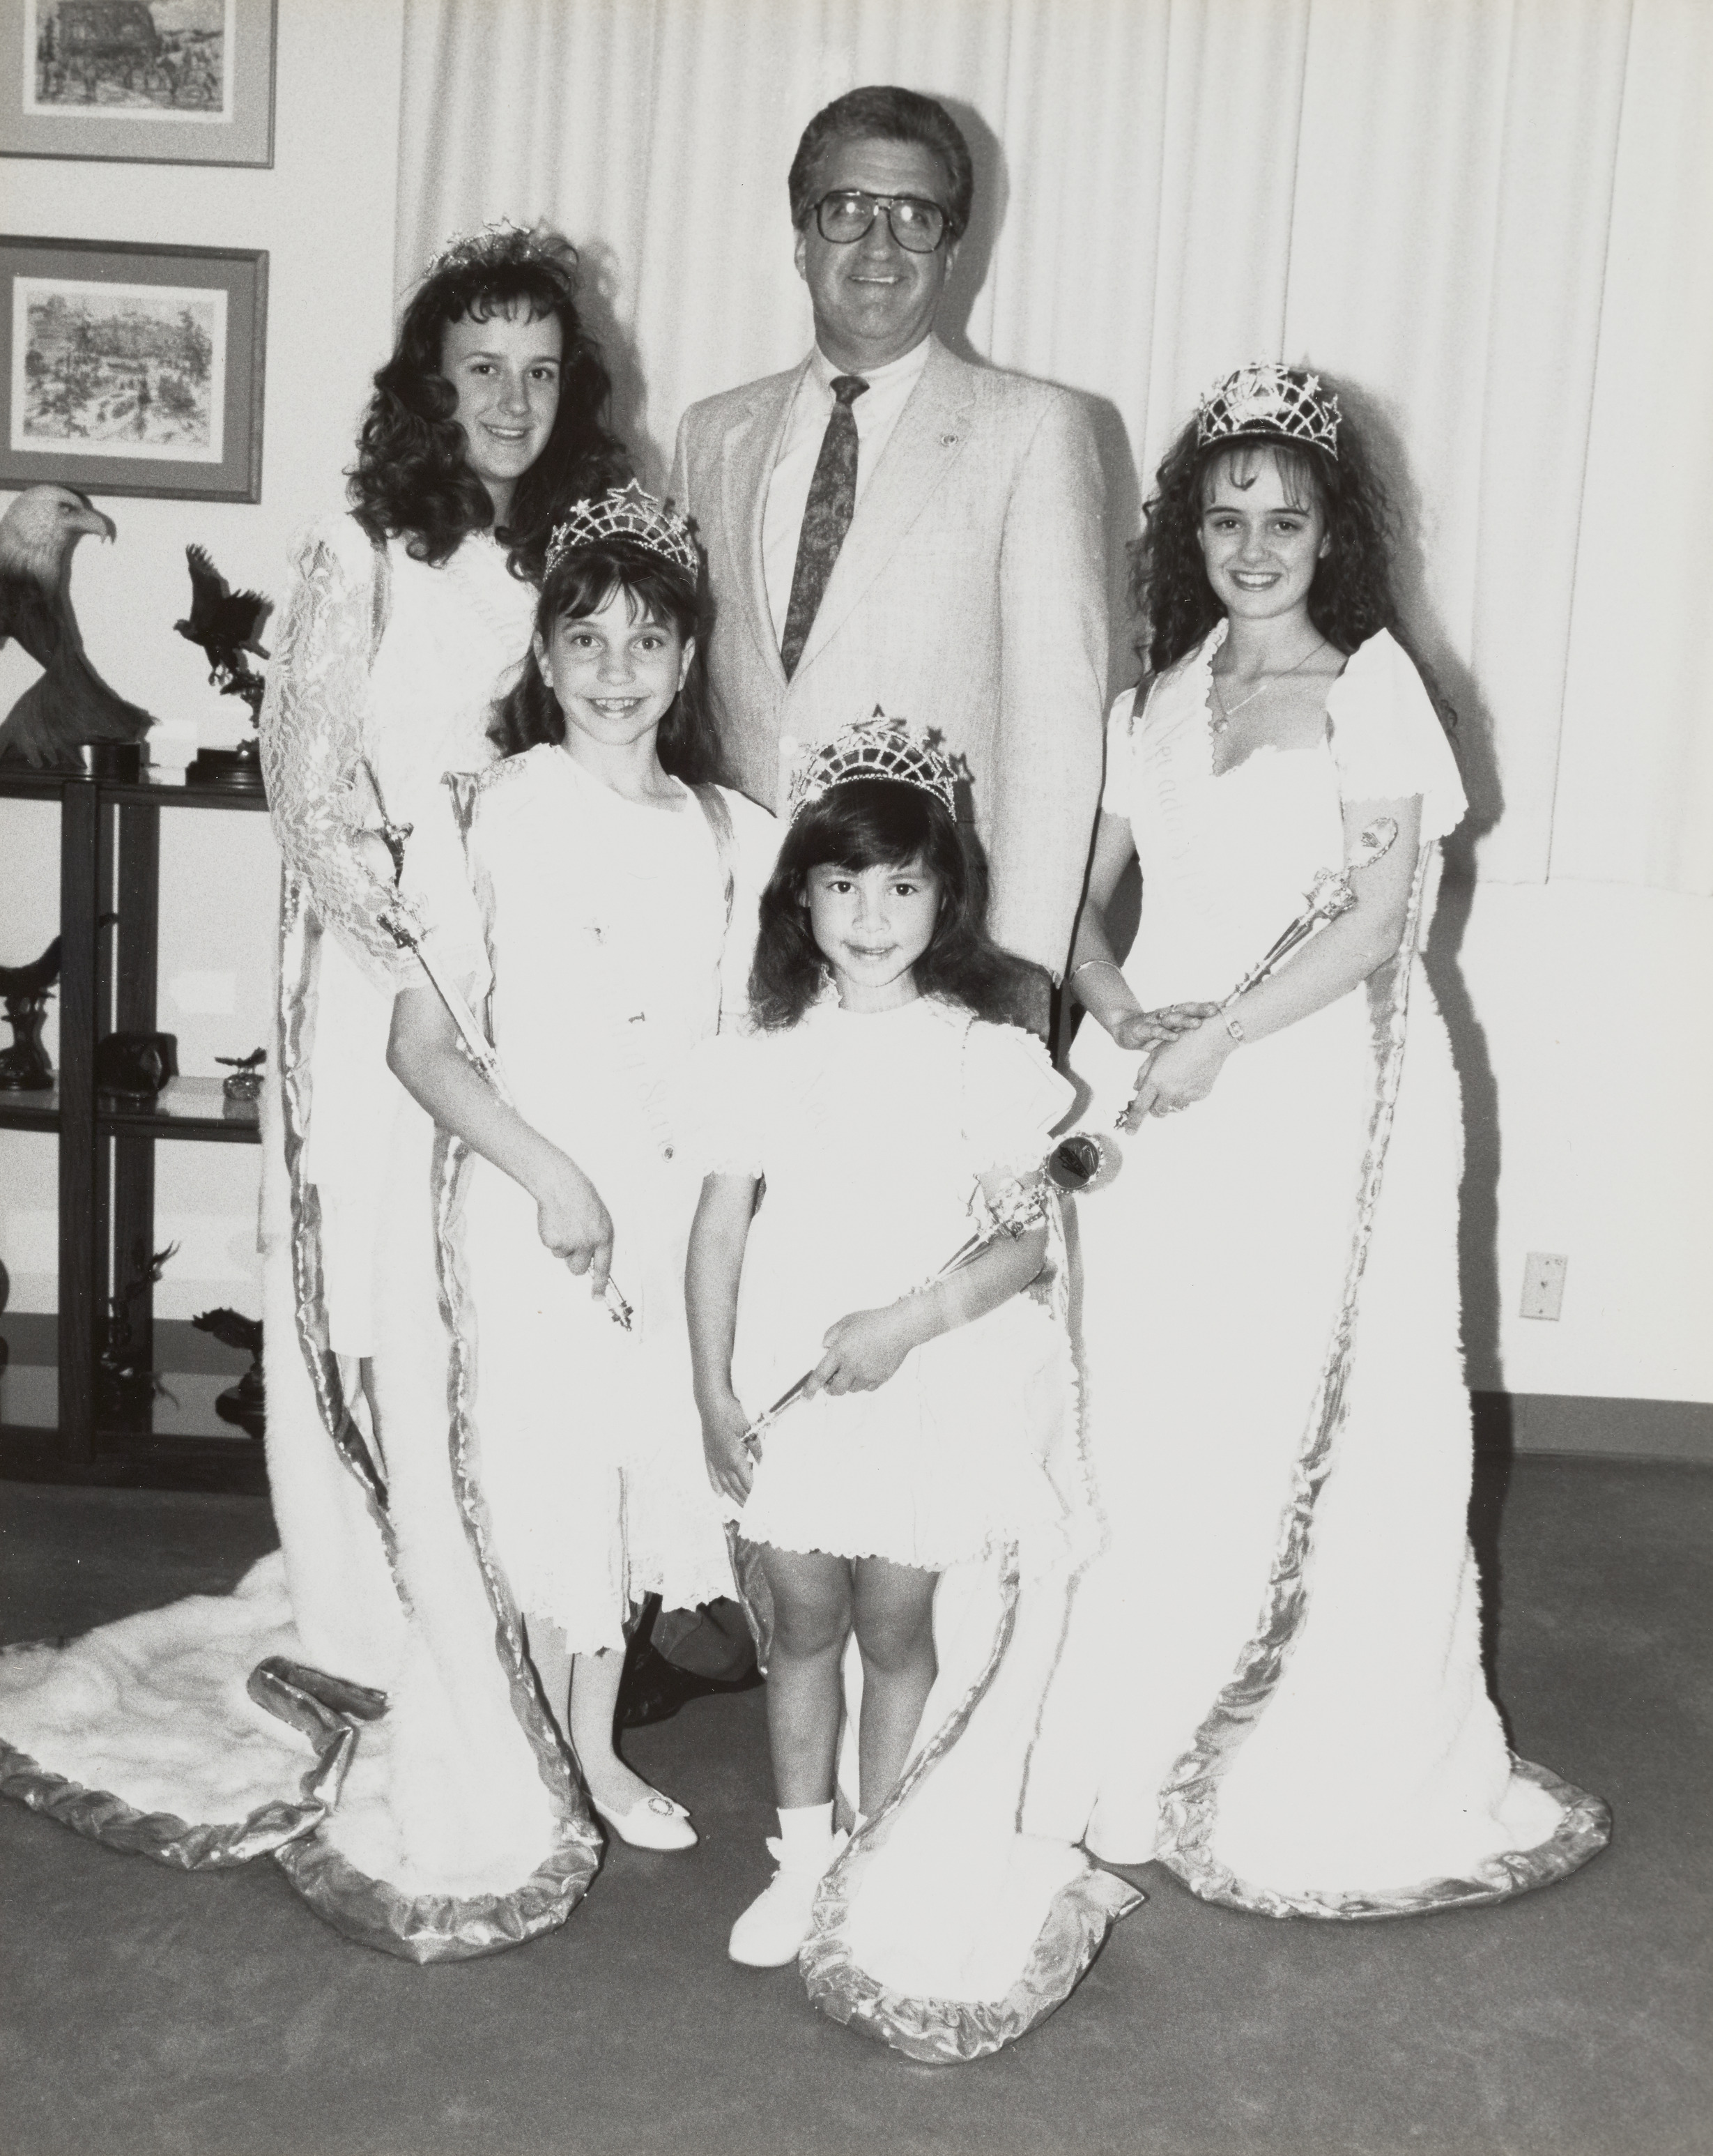 Photograph of Ron Lurie with J & J Pageant Contestants, April 17, 1990